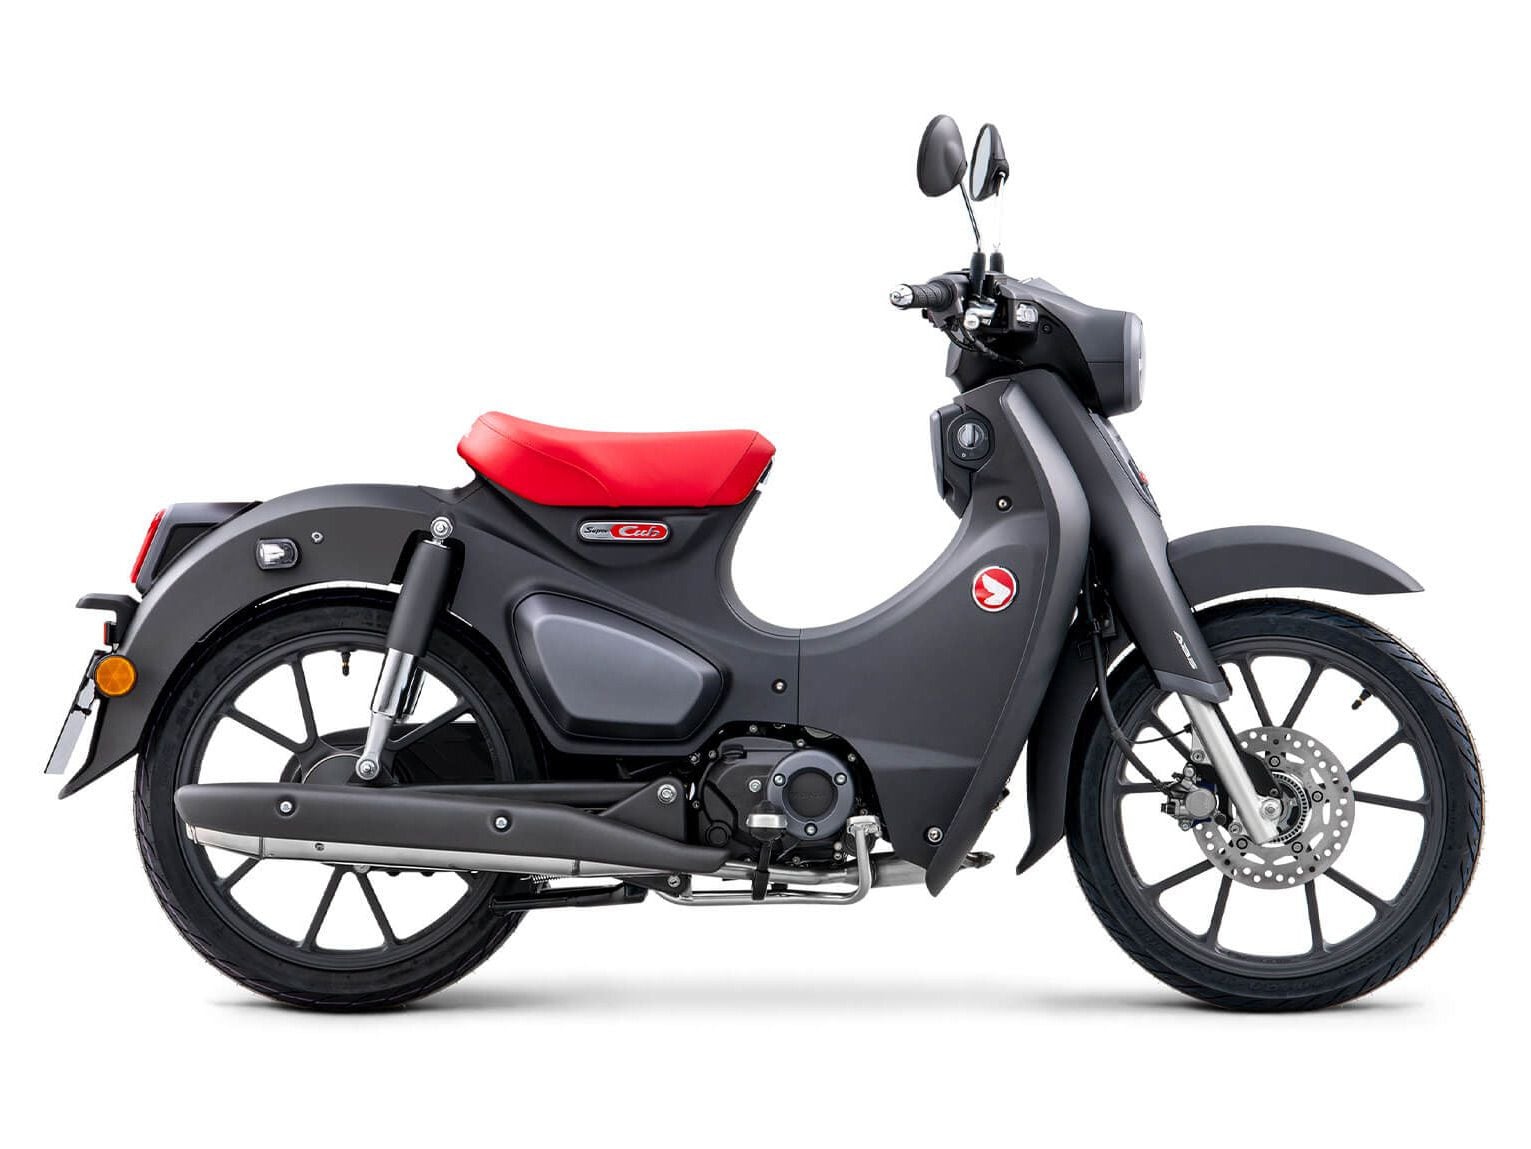 The Super Cub C 125 ABS is also back in the miniMOTO range for 2022. MSRP is $3,799.